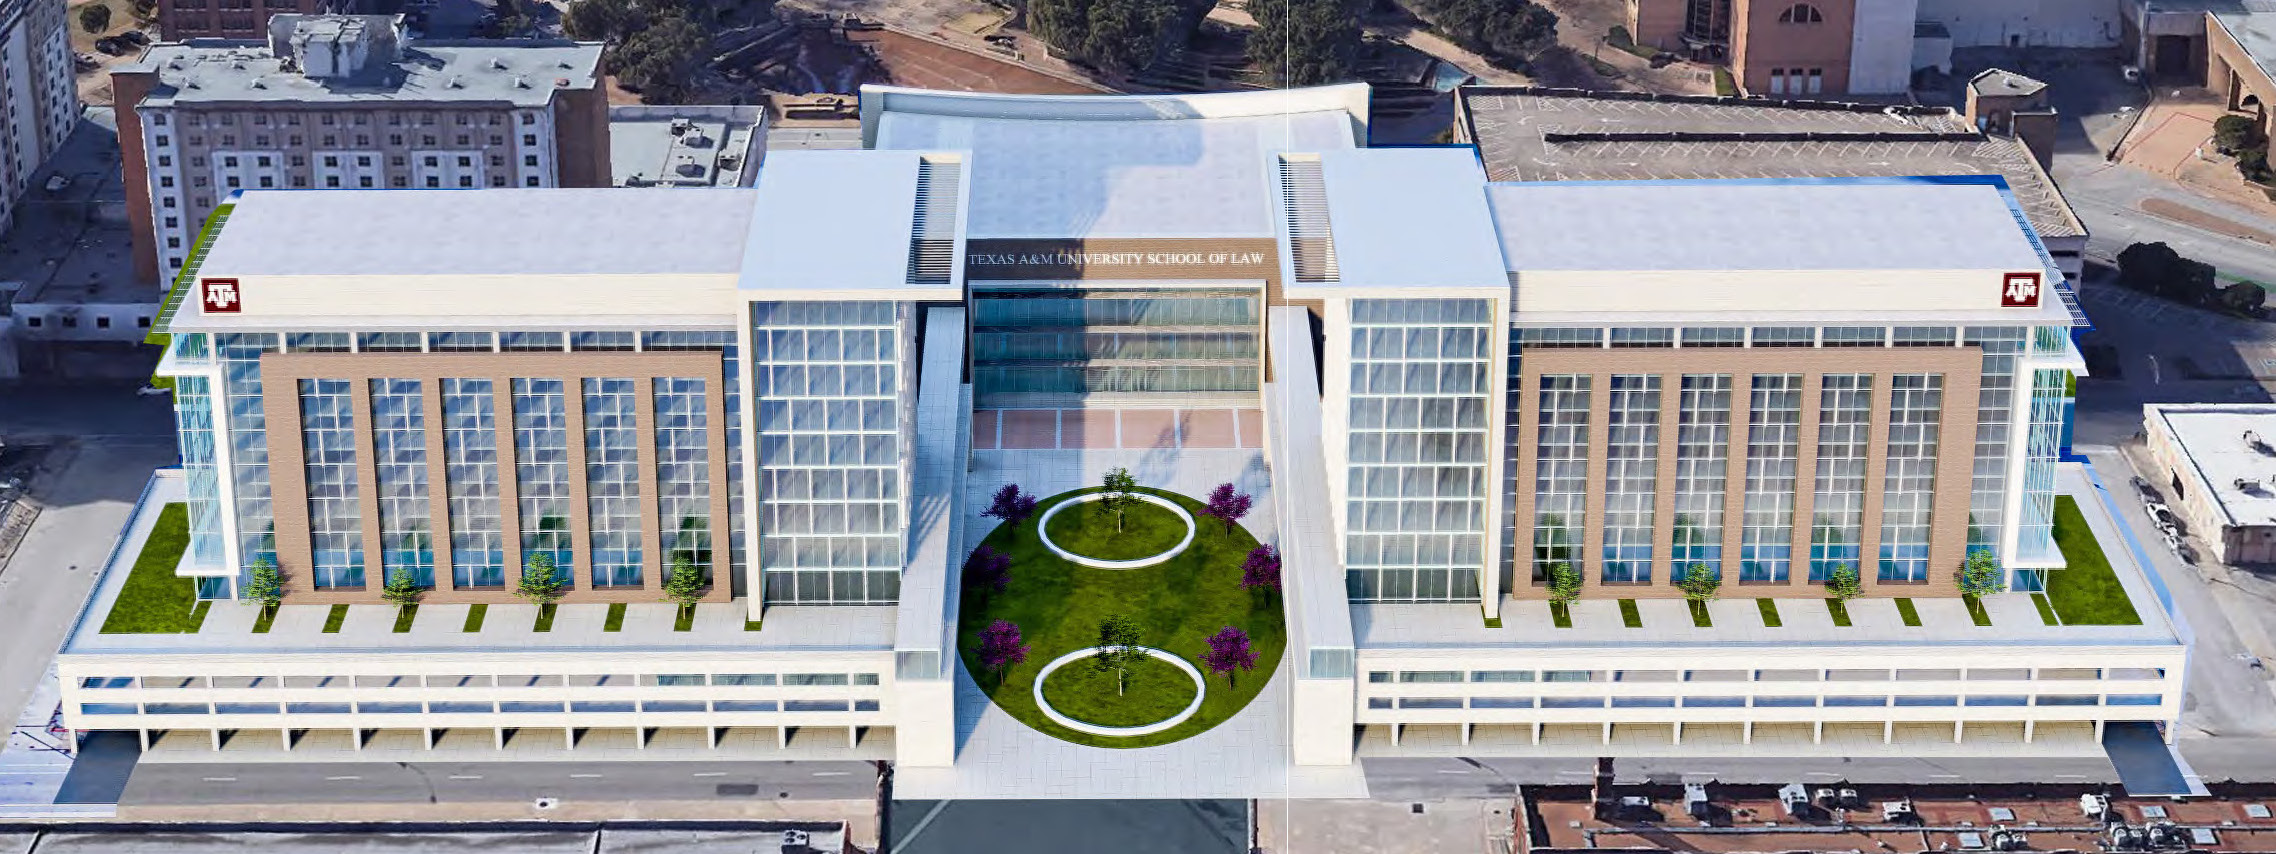 A&M's proposed research and innovation center